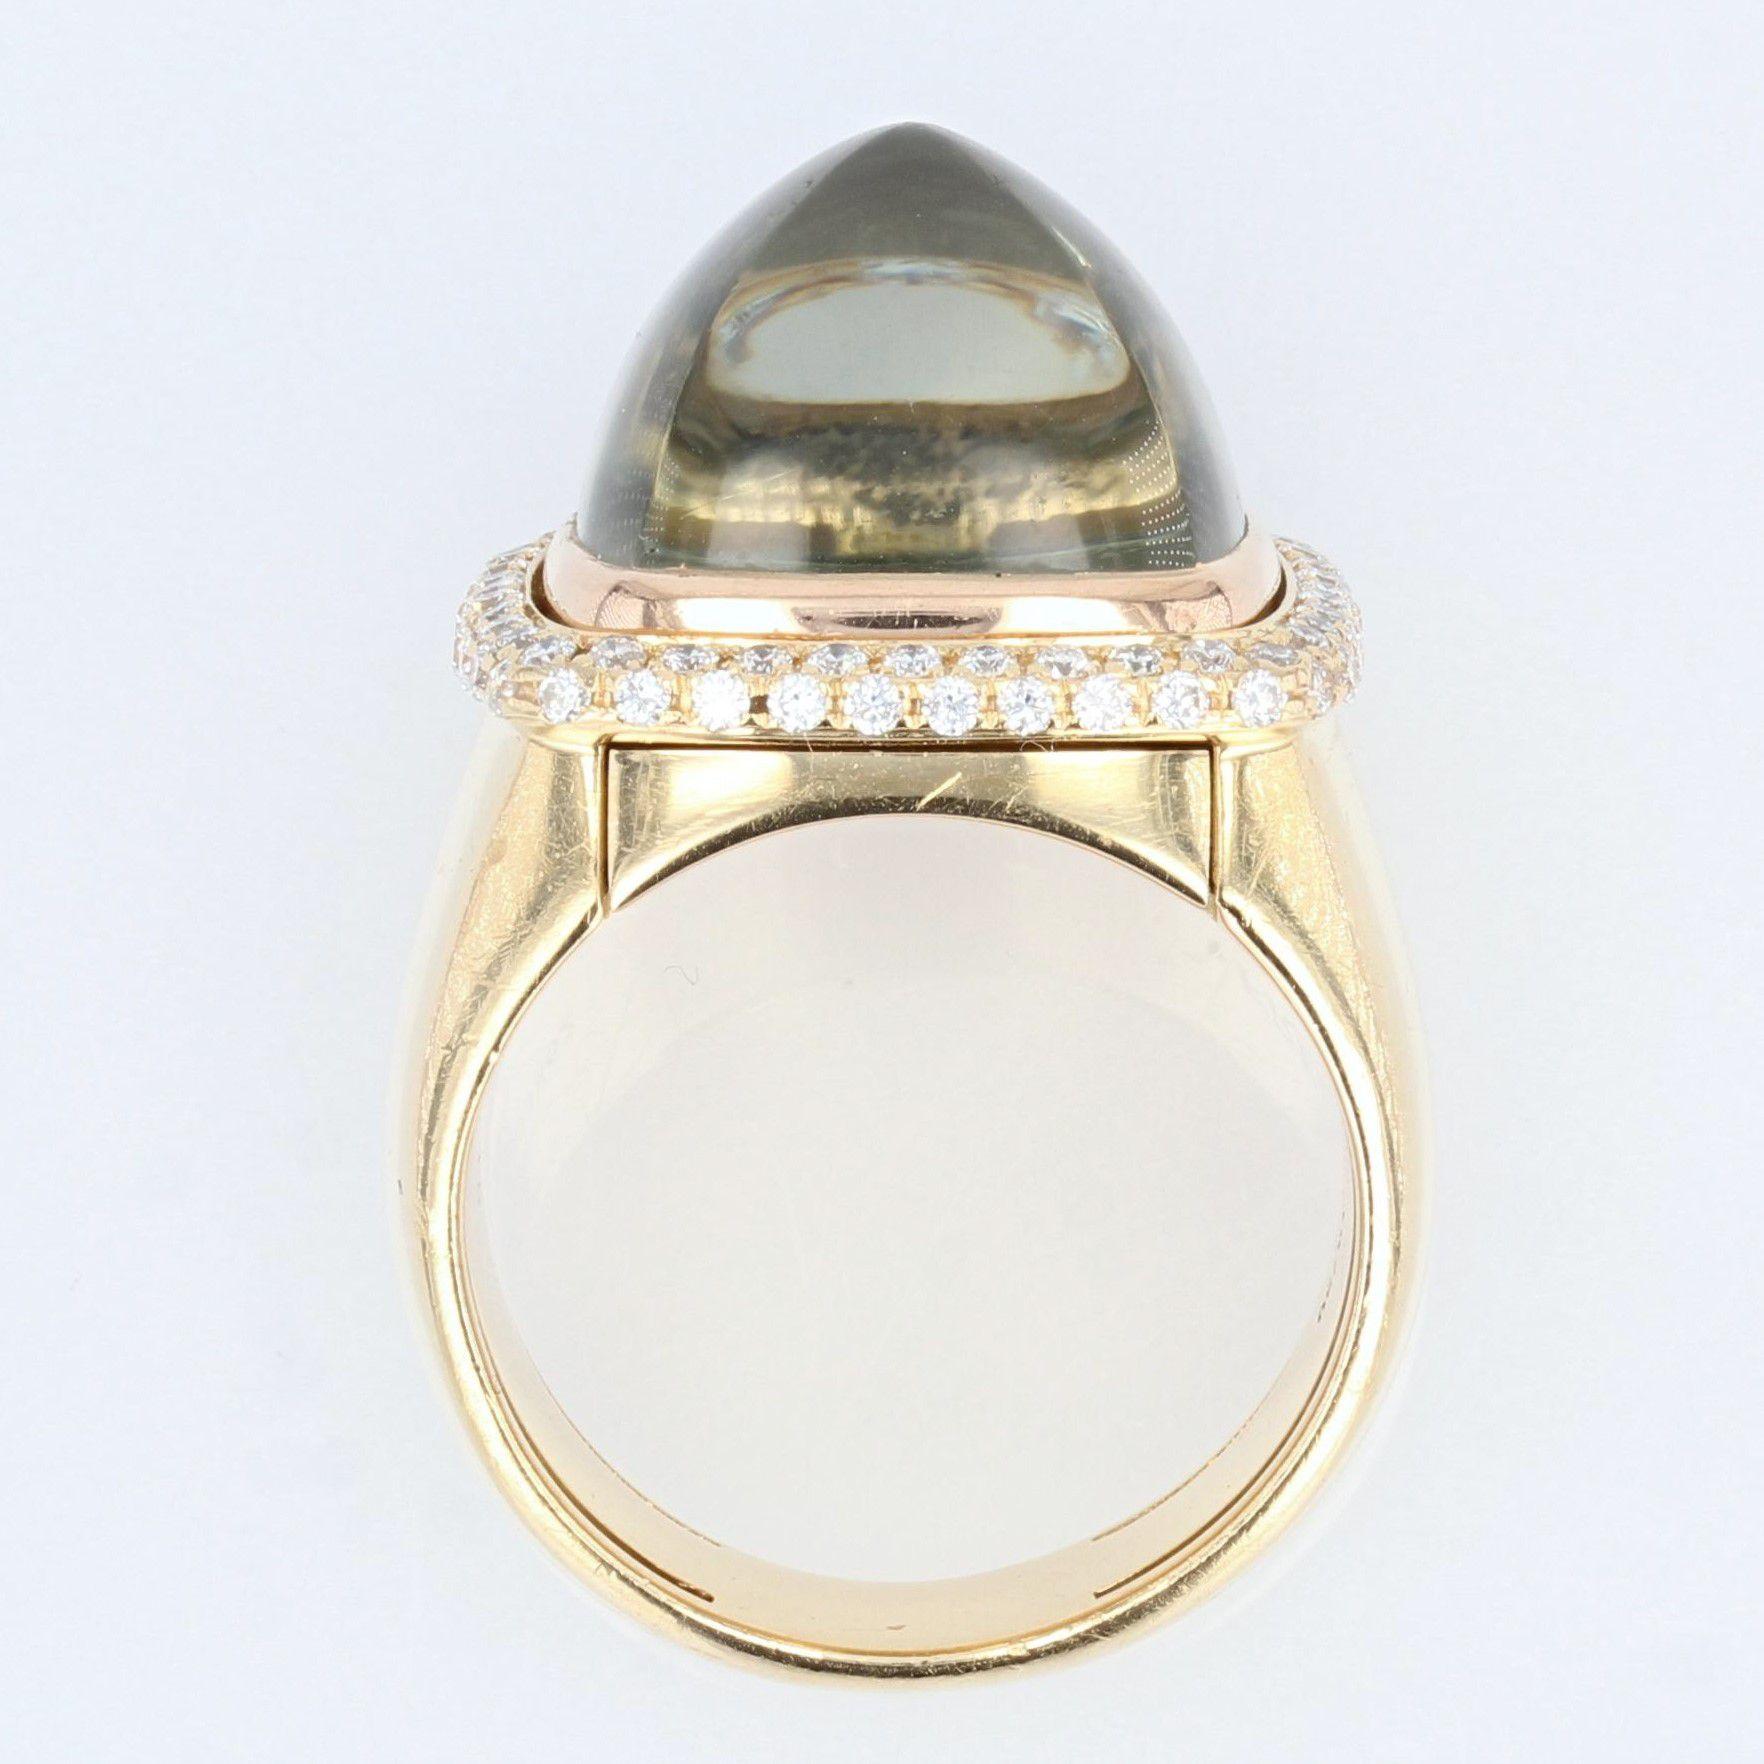 French Modern Fred of Paris Sugarloaf 18 Karat Yellow Gold Ring For Sale 11